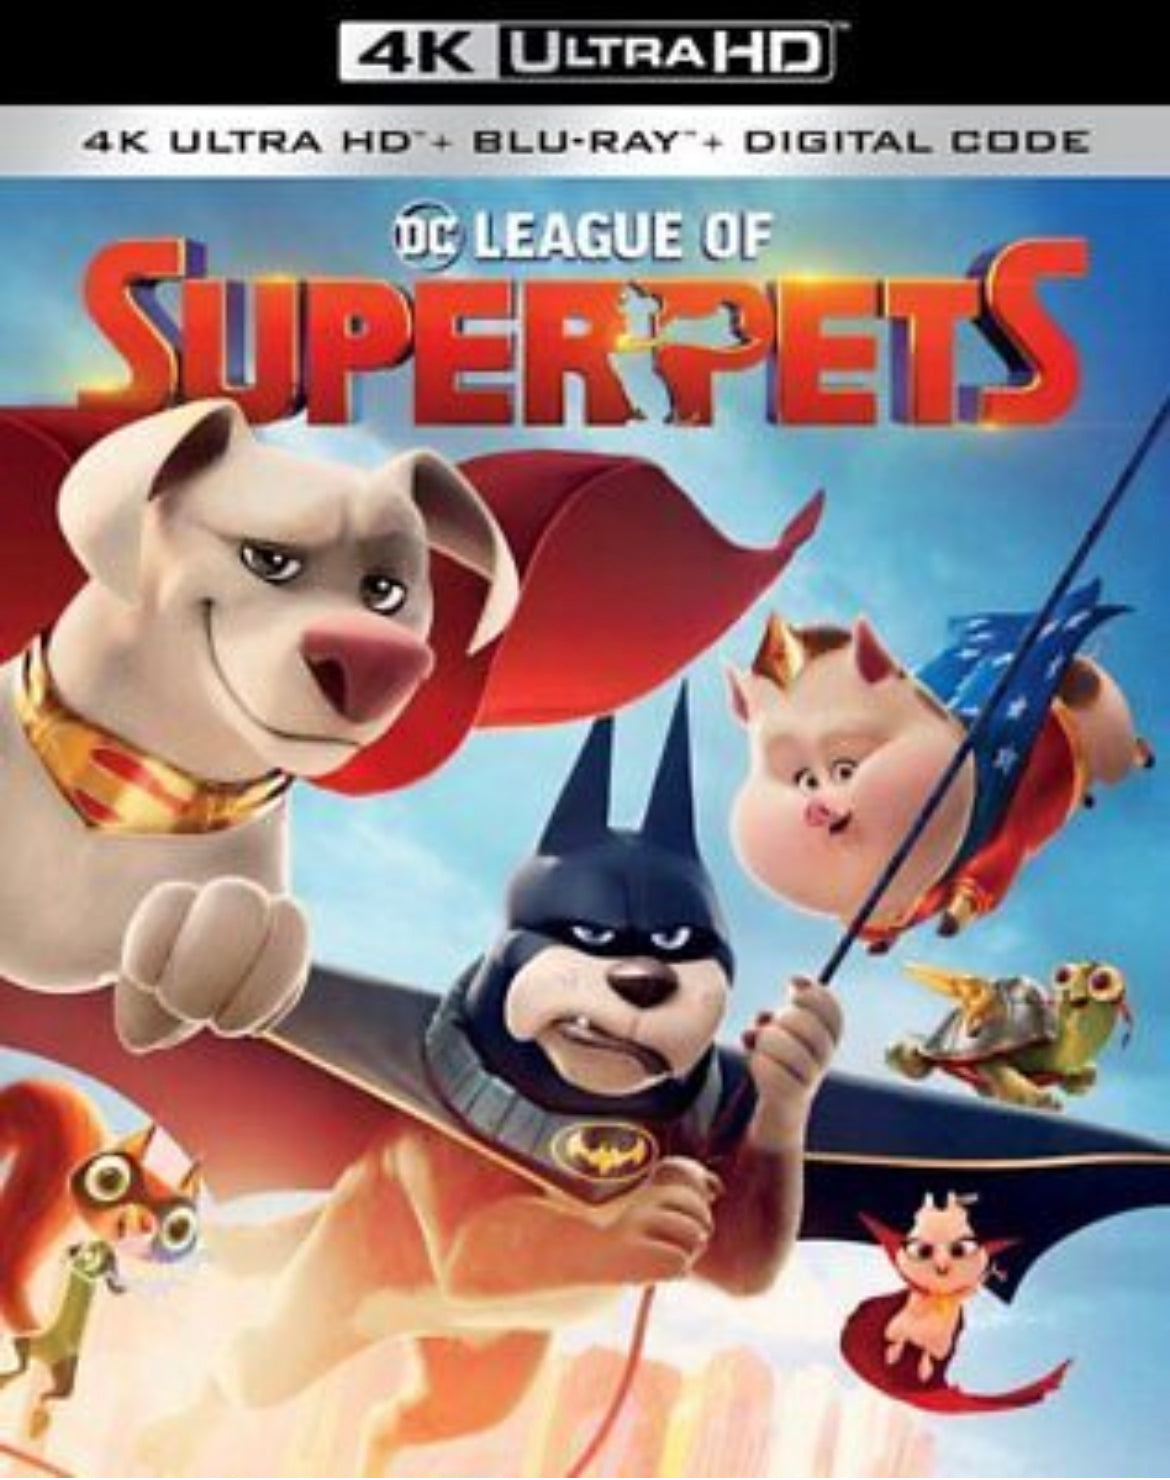 DC League of Super-Pets (2022) Vudu or Movies Anywhere 4K code